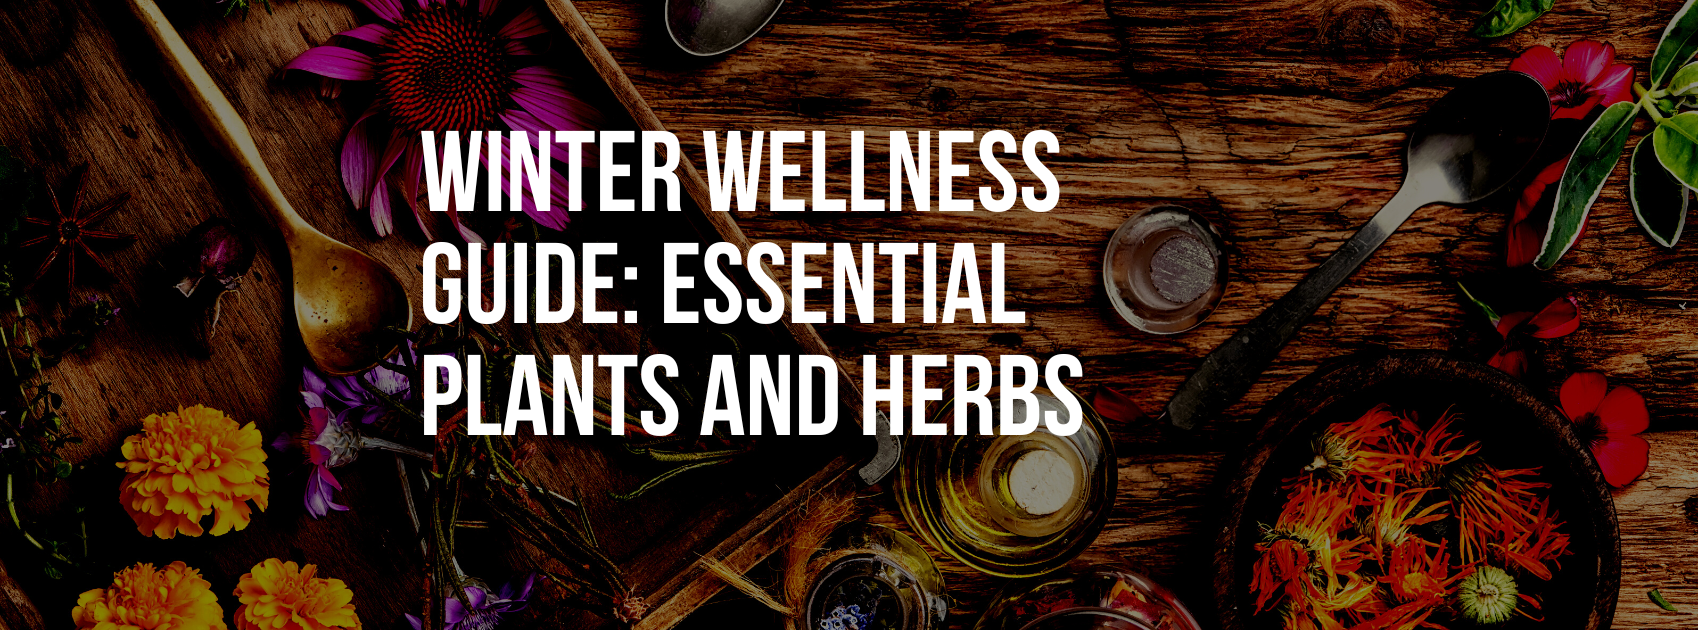 Winter Wellness Guide: Essential Plants and Herbs for a Healthy Season